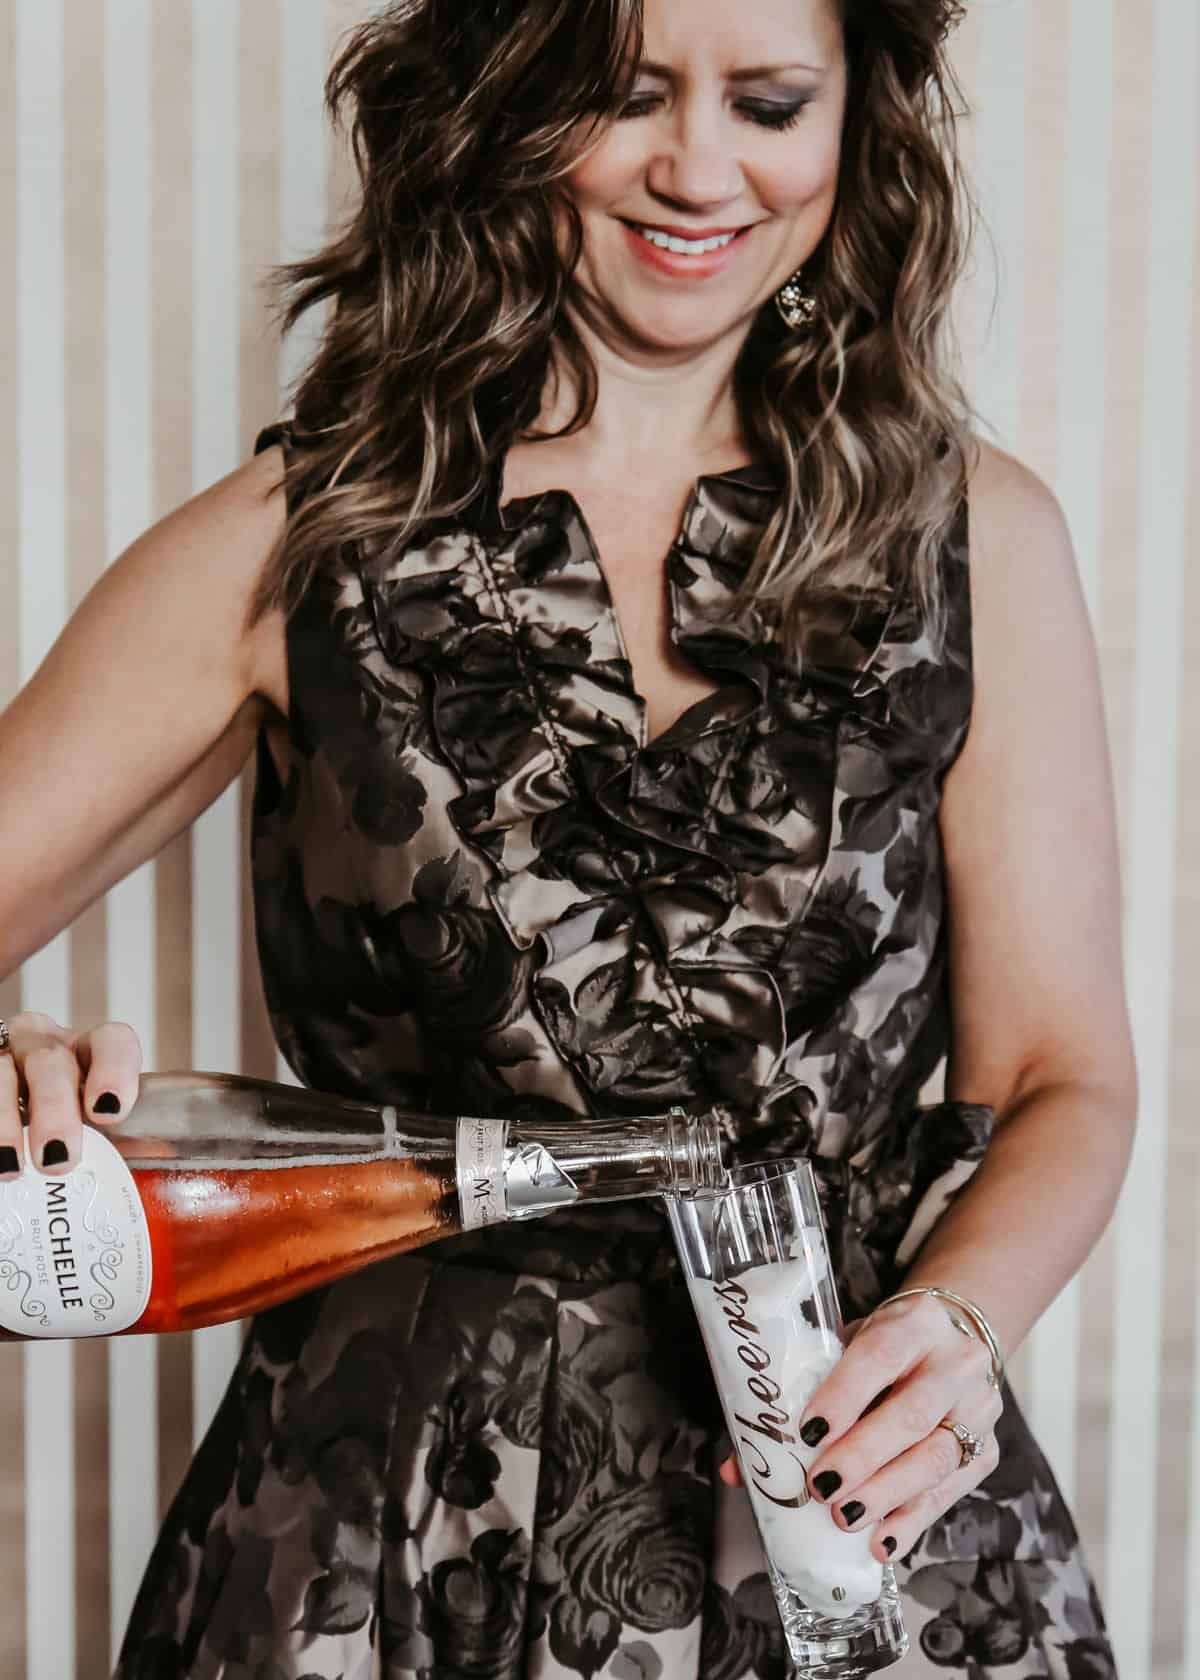 lady in a cocktail dress pouring champagne into a glass.